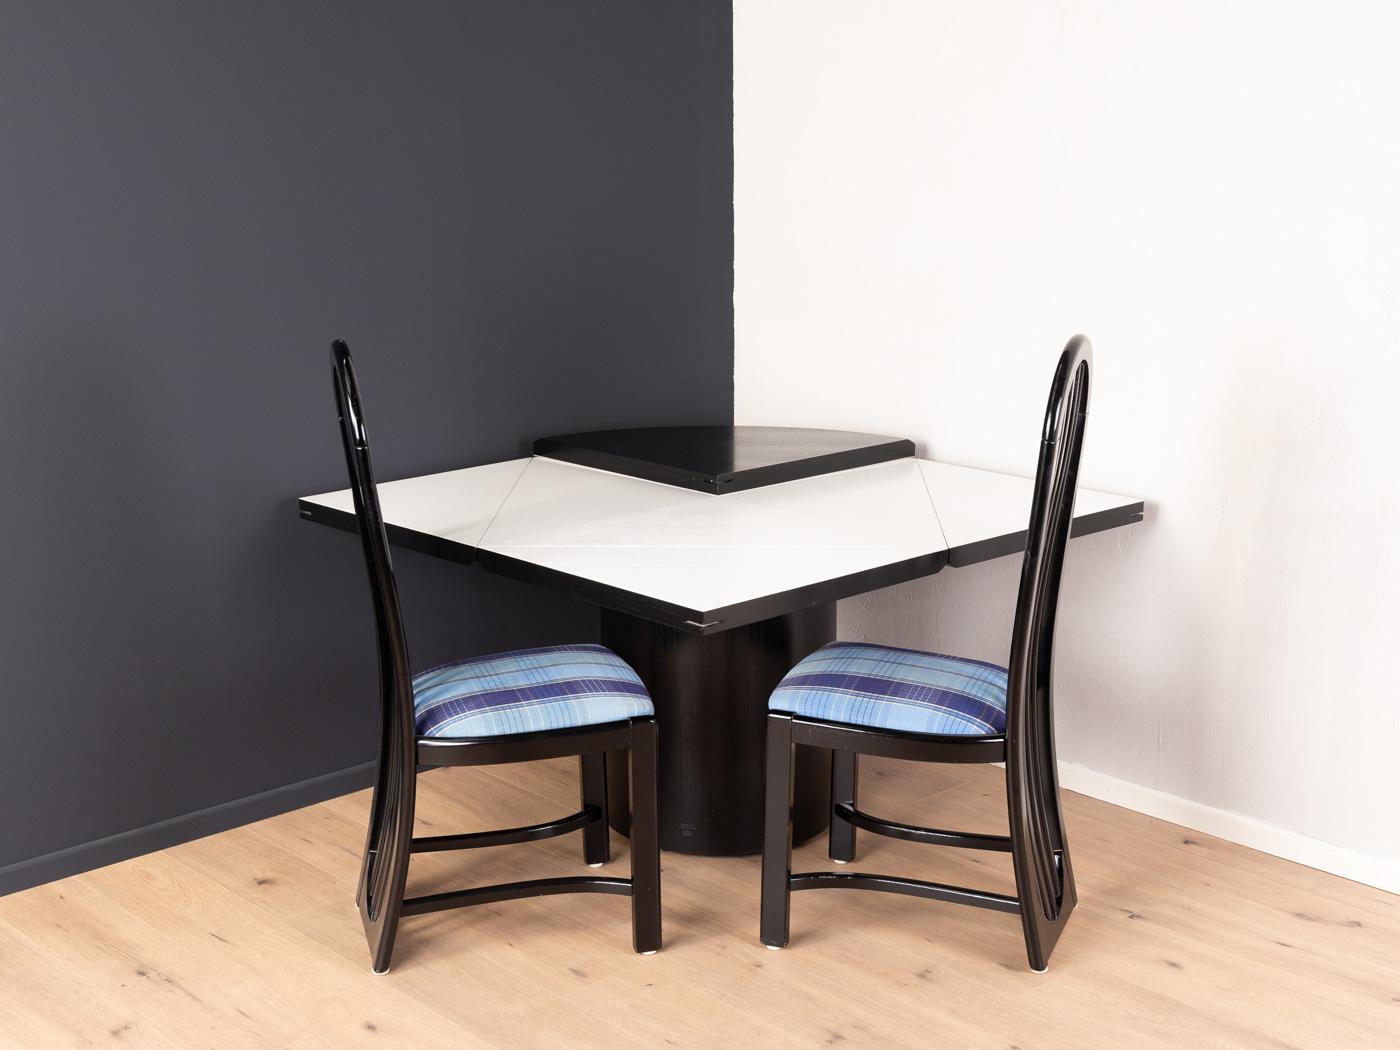 Quadrondo dining table from the 1980s by Erwin Nagel for Rosenthal Einrichtung. High-quality construction consisting of a round base and a table top in black stained ash veneer. By unfolding each quarter, the round table top can be converted into a